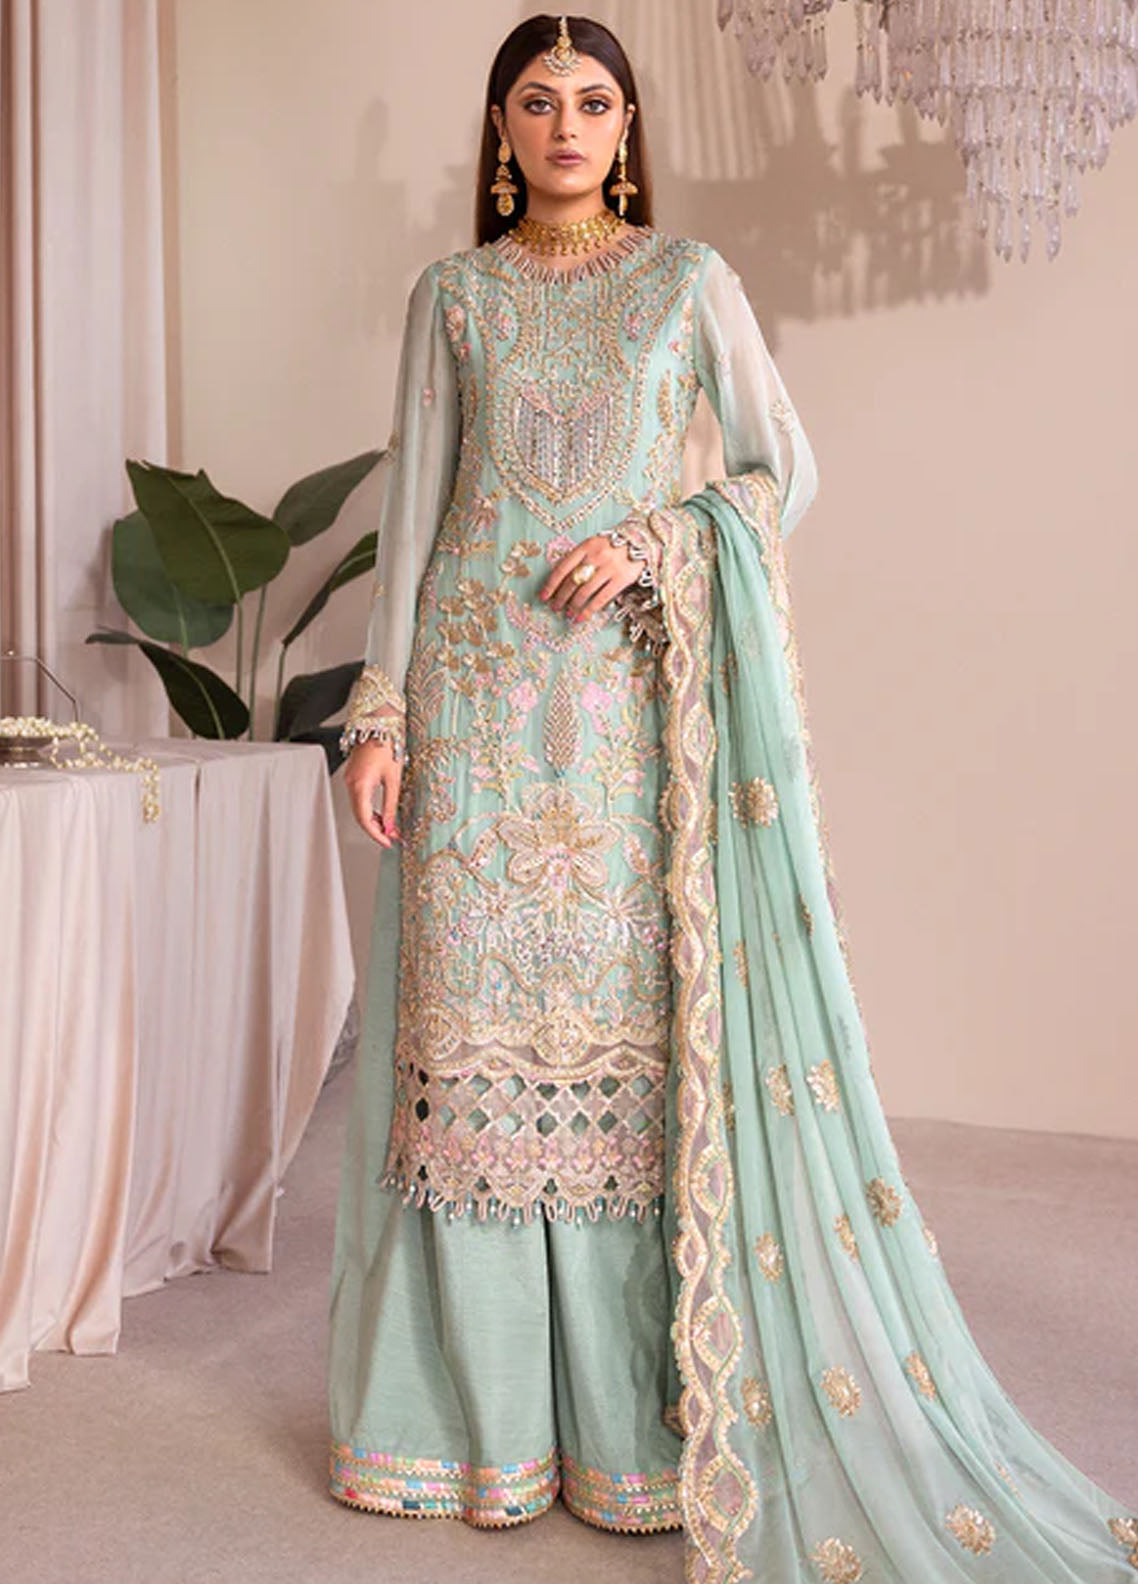 Romansiyyah By Emaan Adeel Luxury Formals Collection 2023 Dalilah